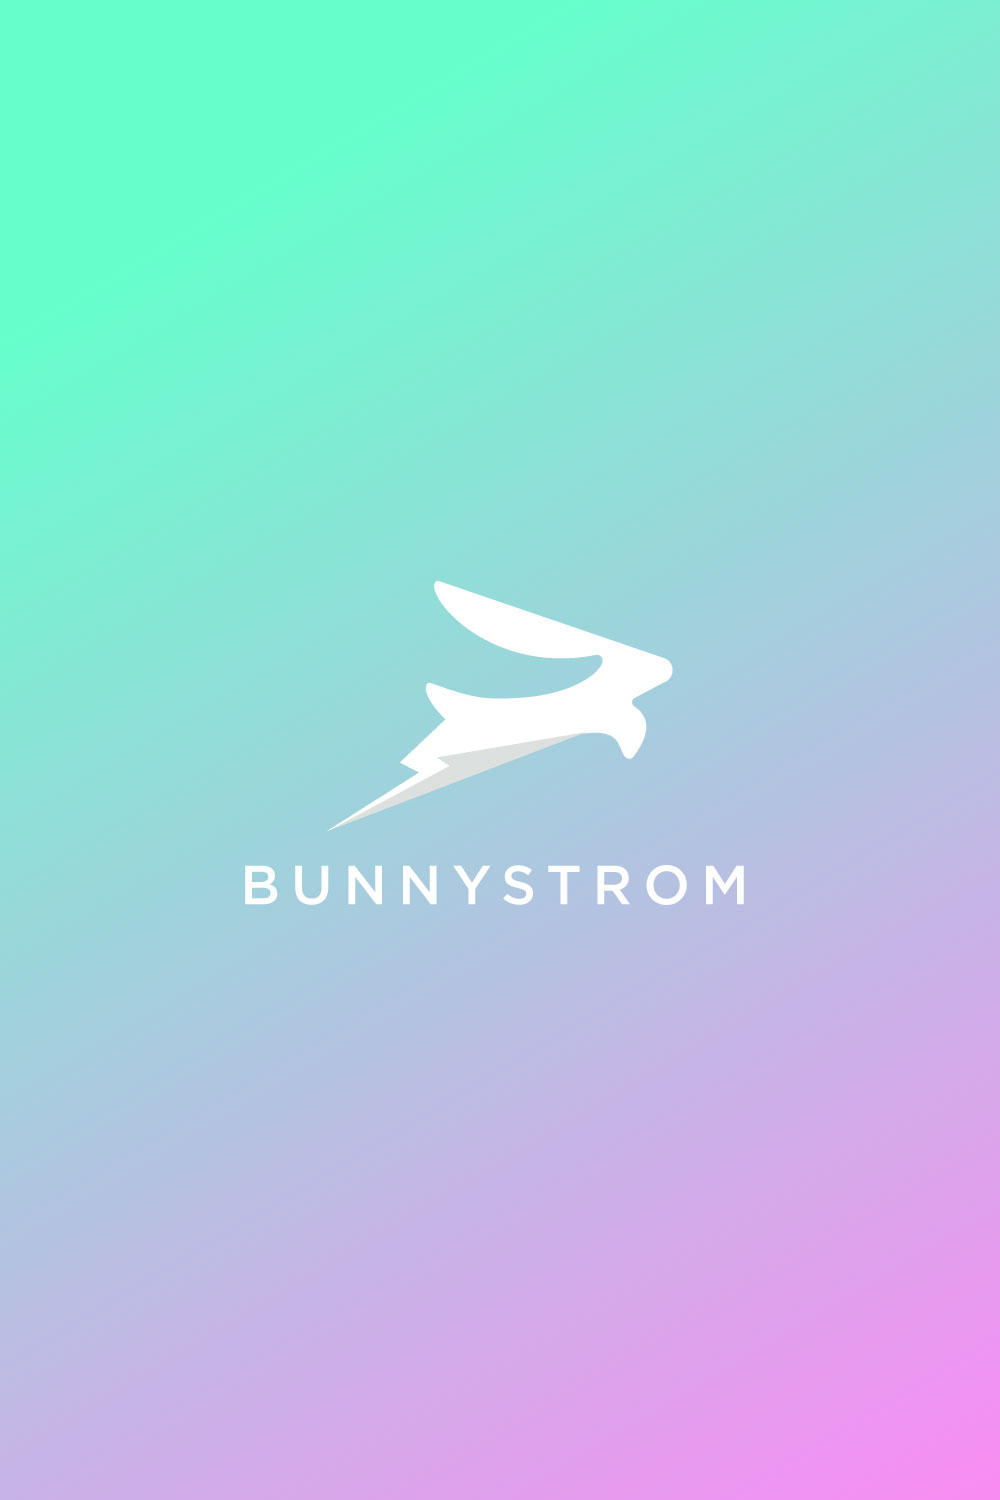 bunnystrom logo typography pinterest preview image.